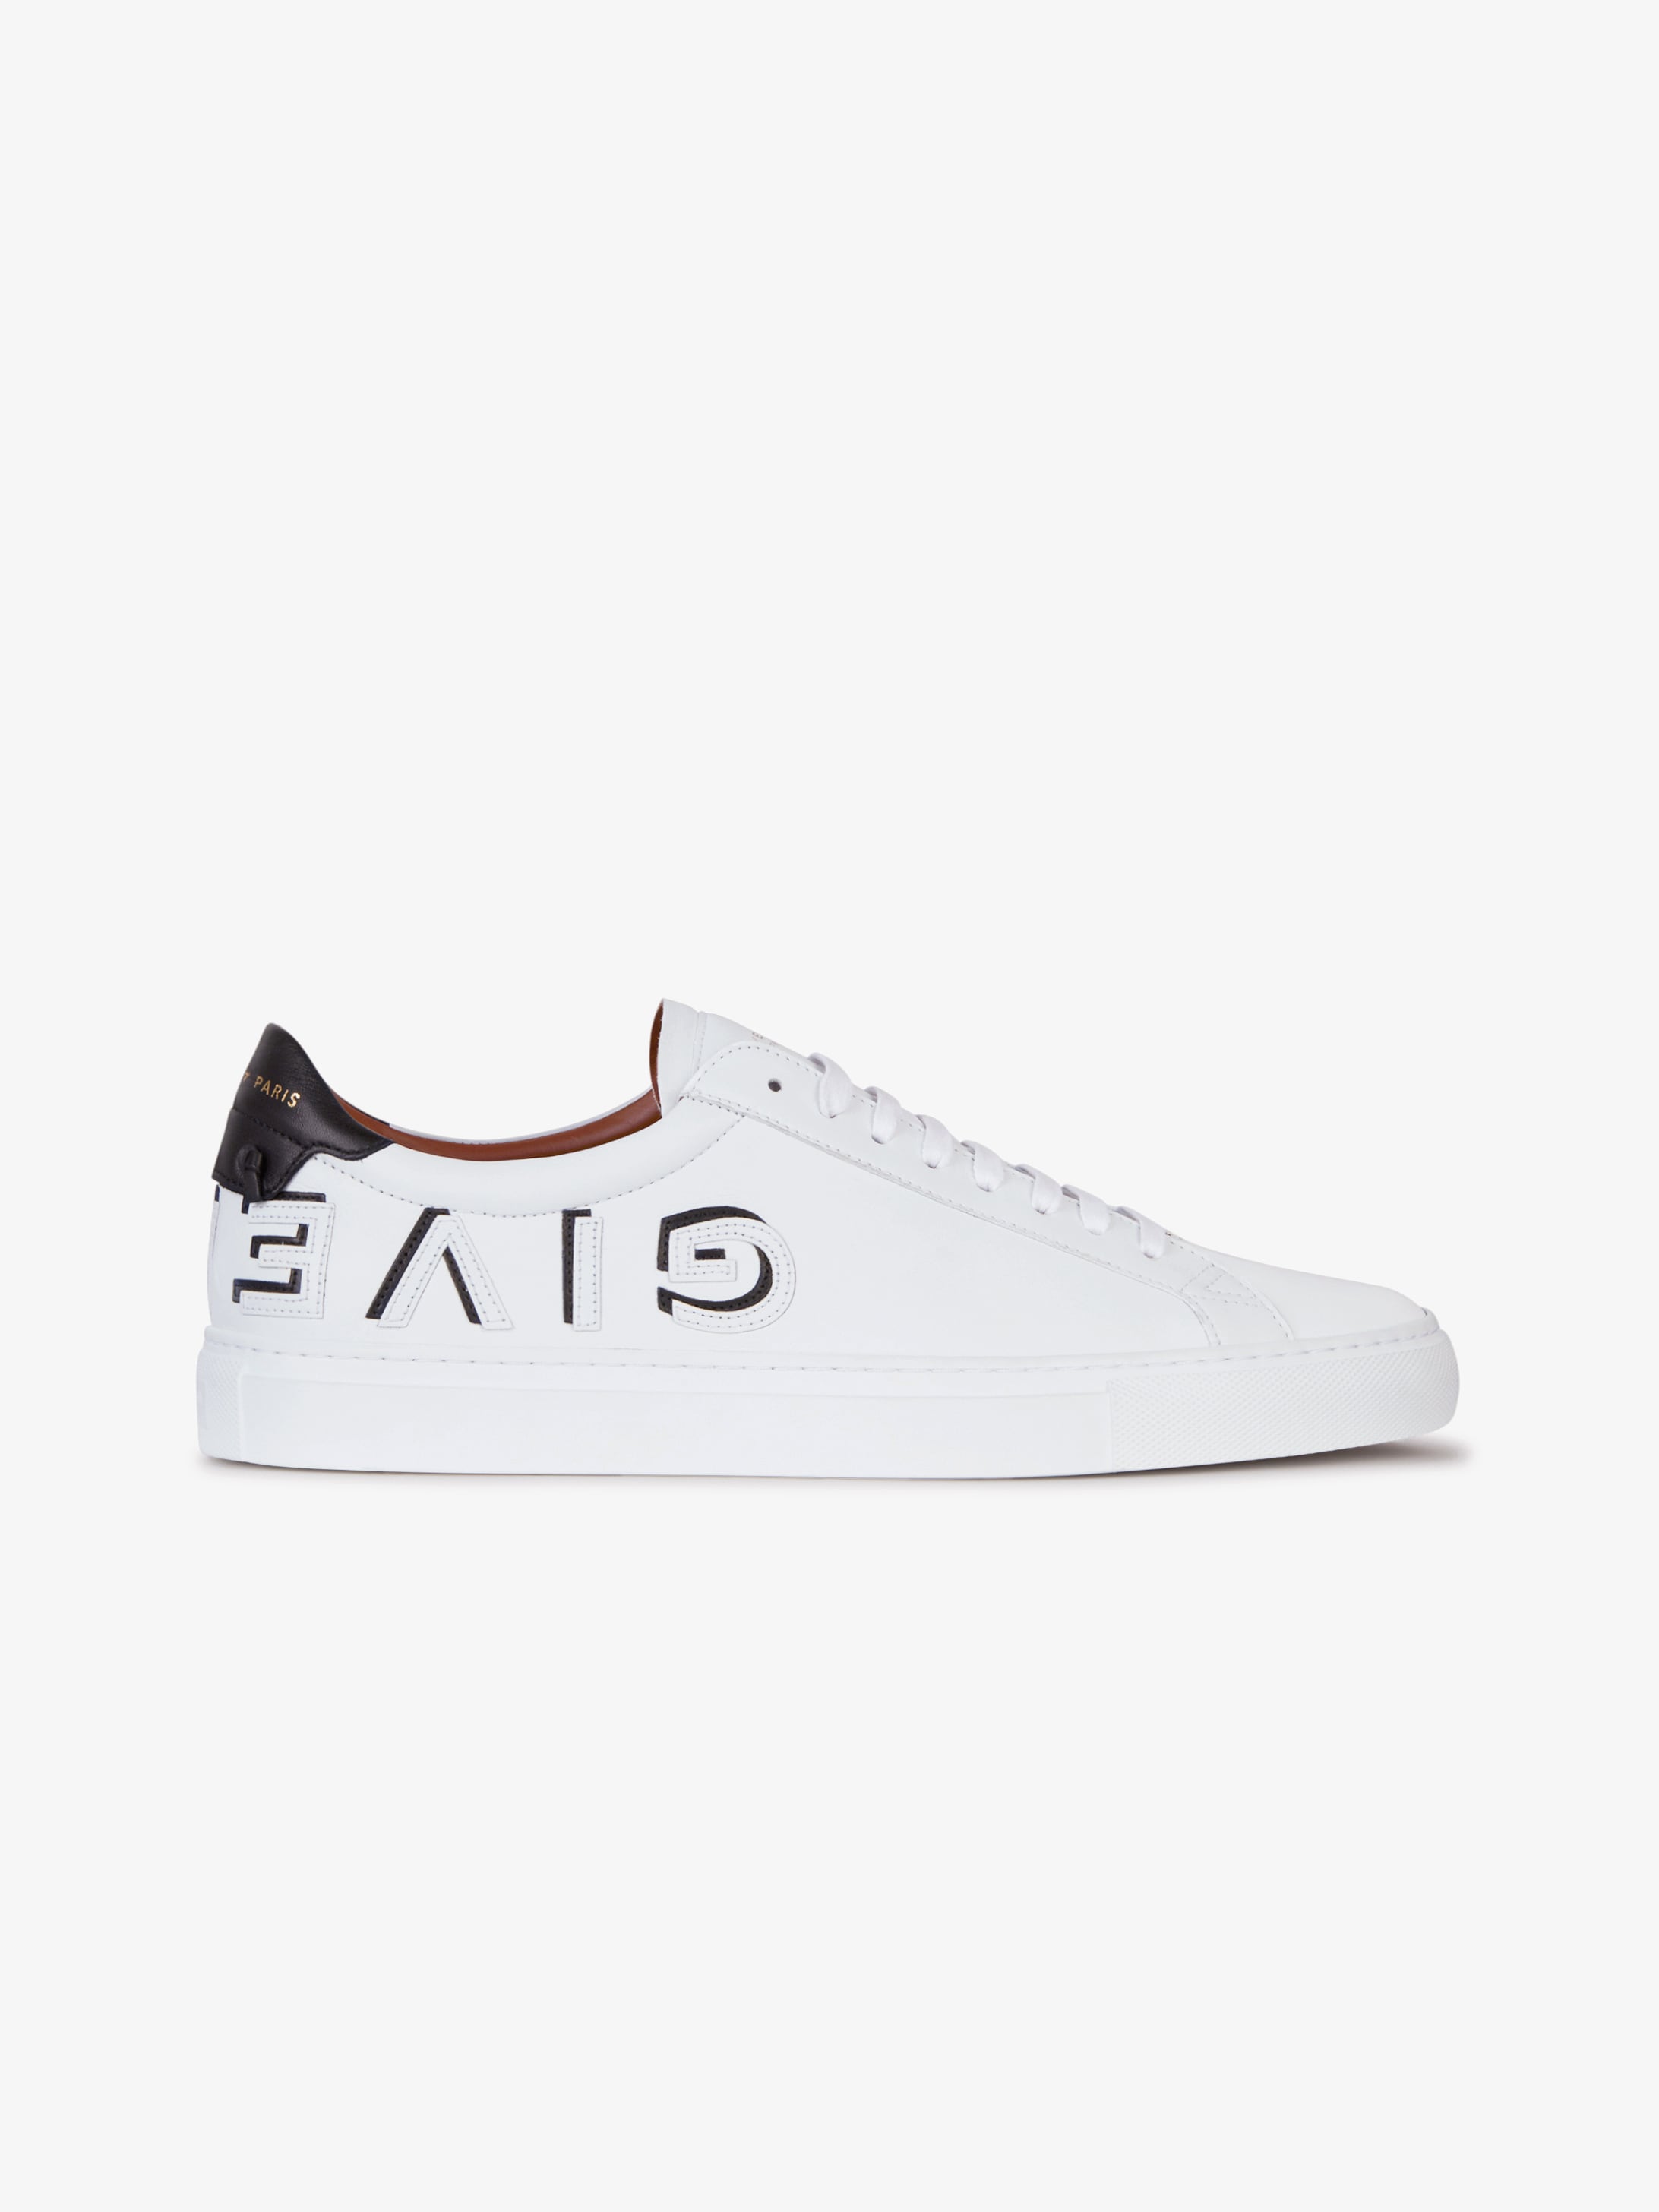 Givenchy Men's Casual Shoes - Shoes | Stylicy USA